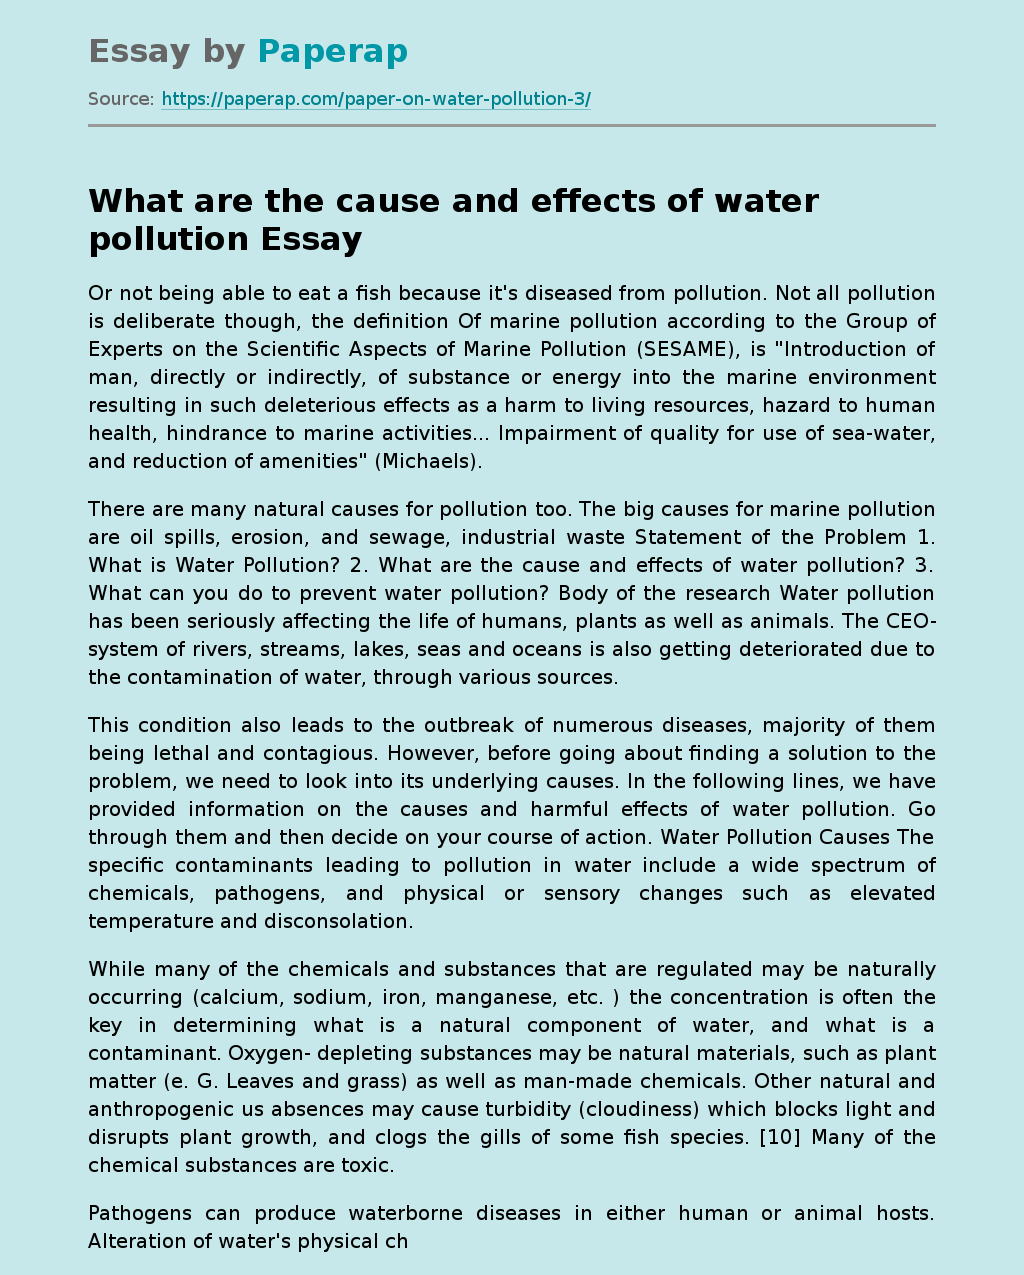 What are the cause and effects of water pollution